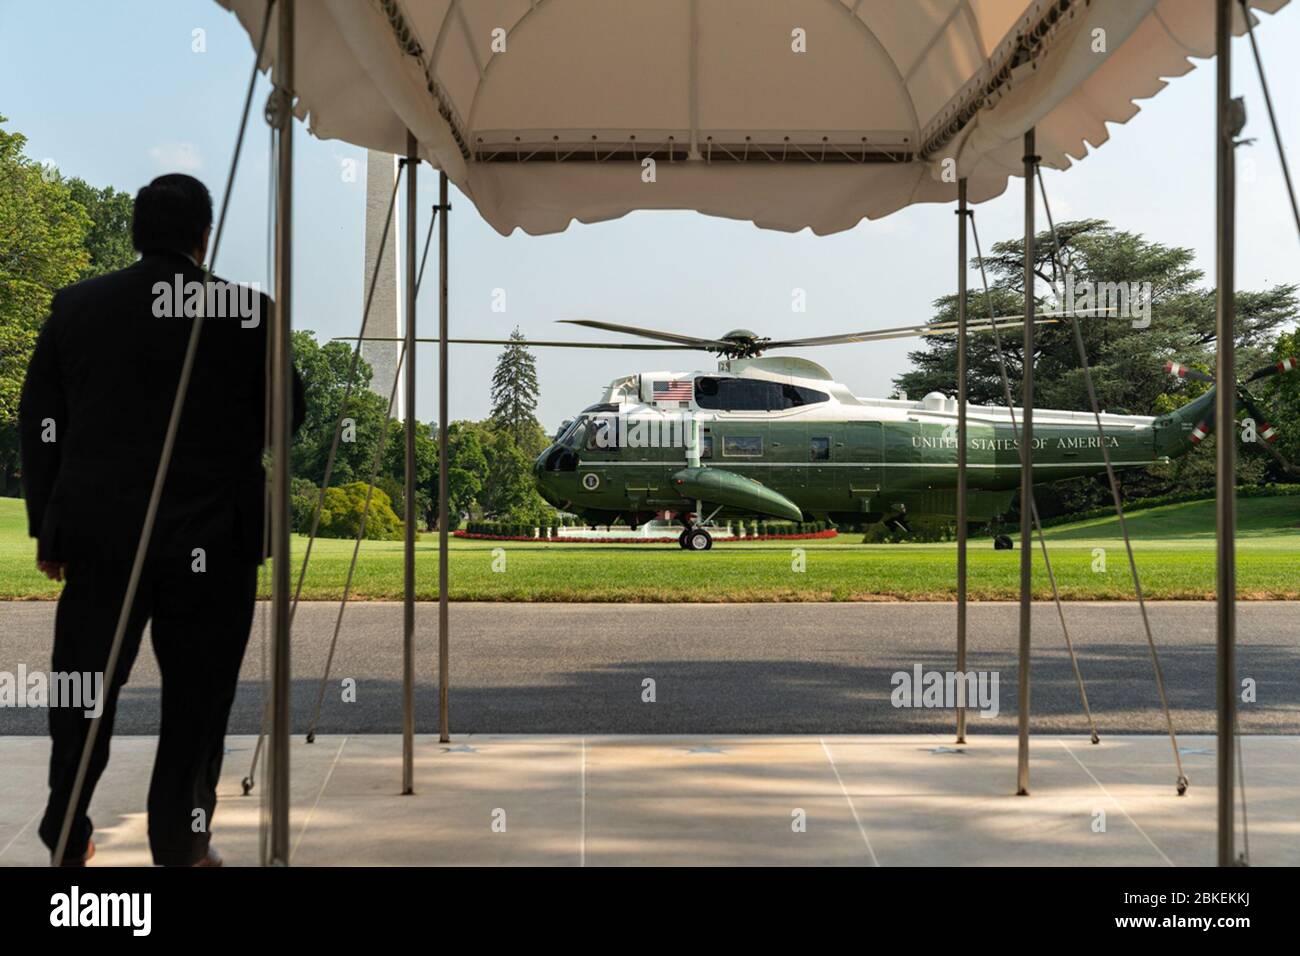 President Donald J. Trump aboard Marine One approaches for a landing on the  South Lawn of the White House Sunday, July 21, 2019, concluding his trip to  Bedminster, N.J. President Trump Returns